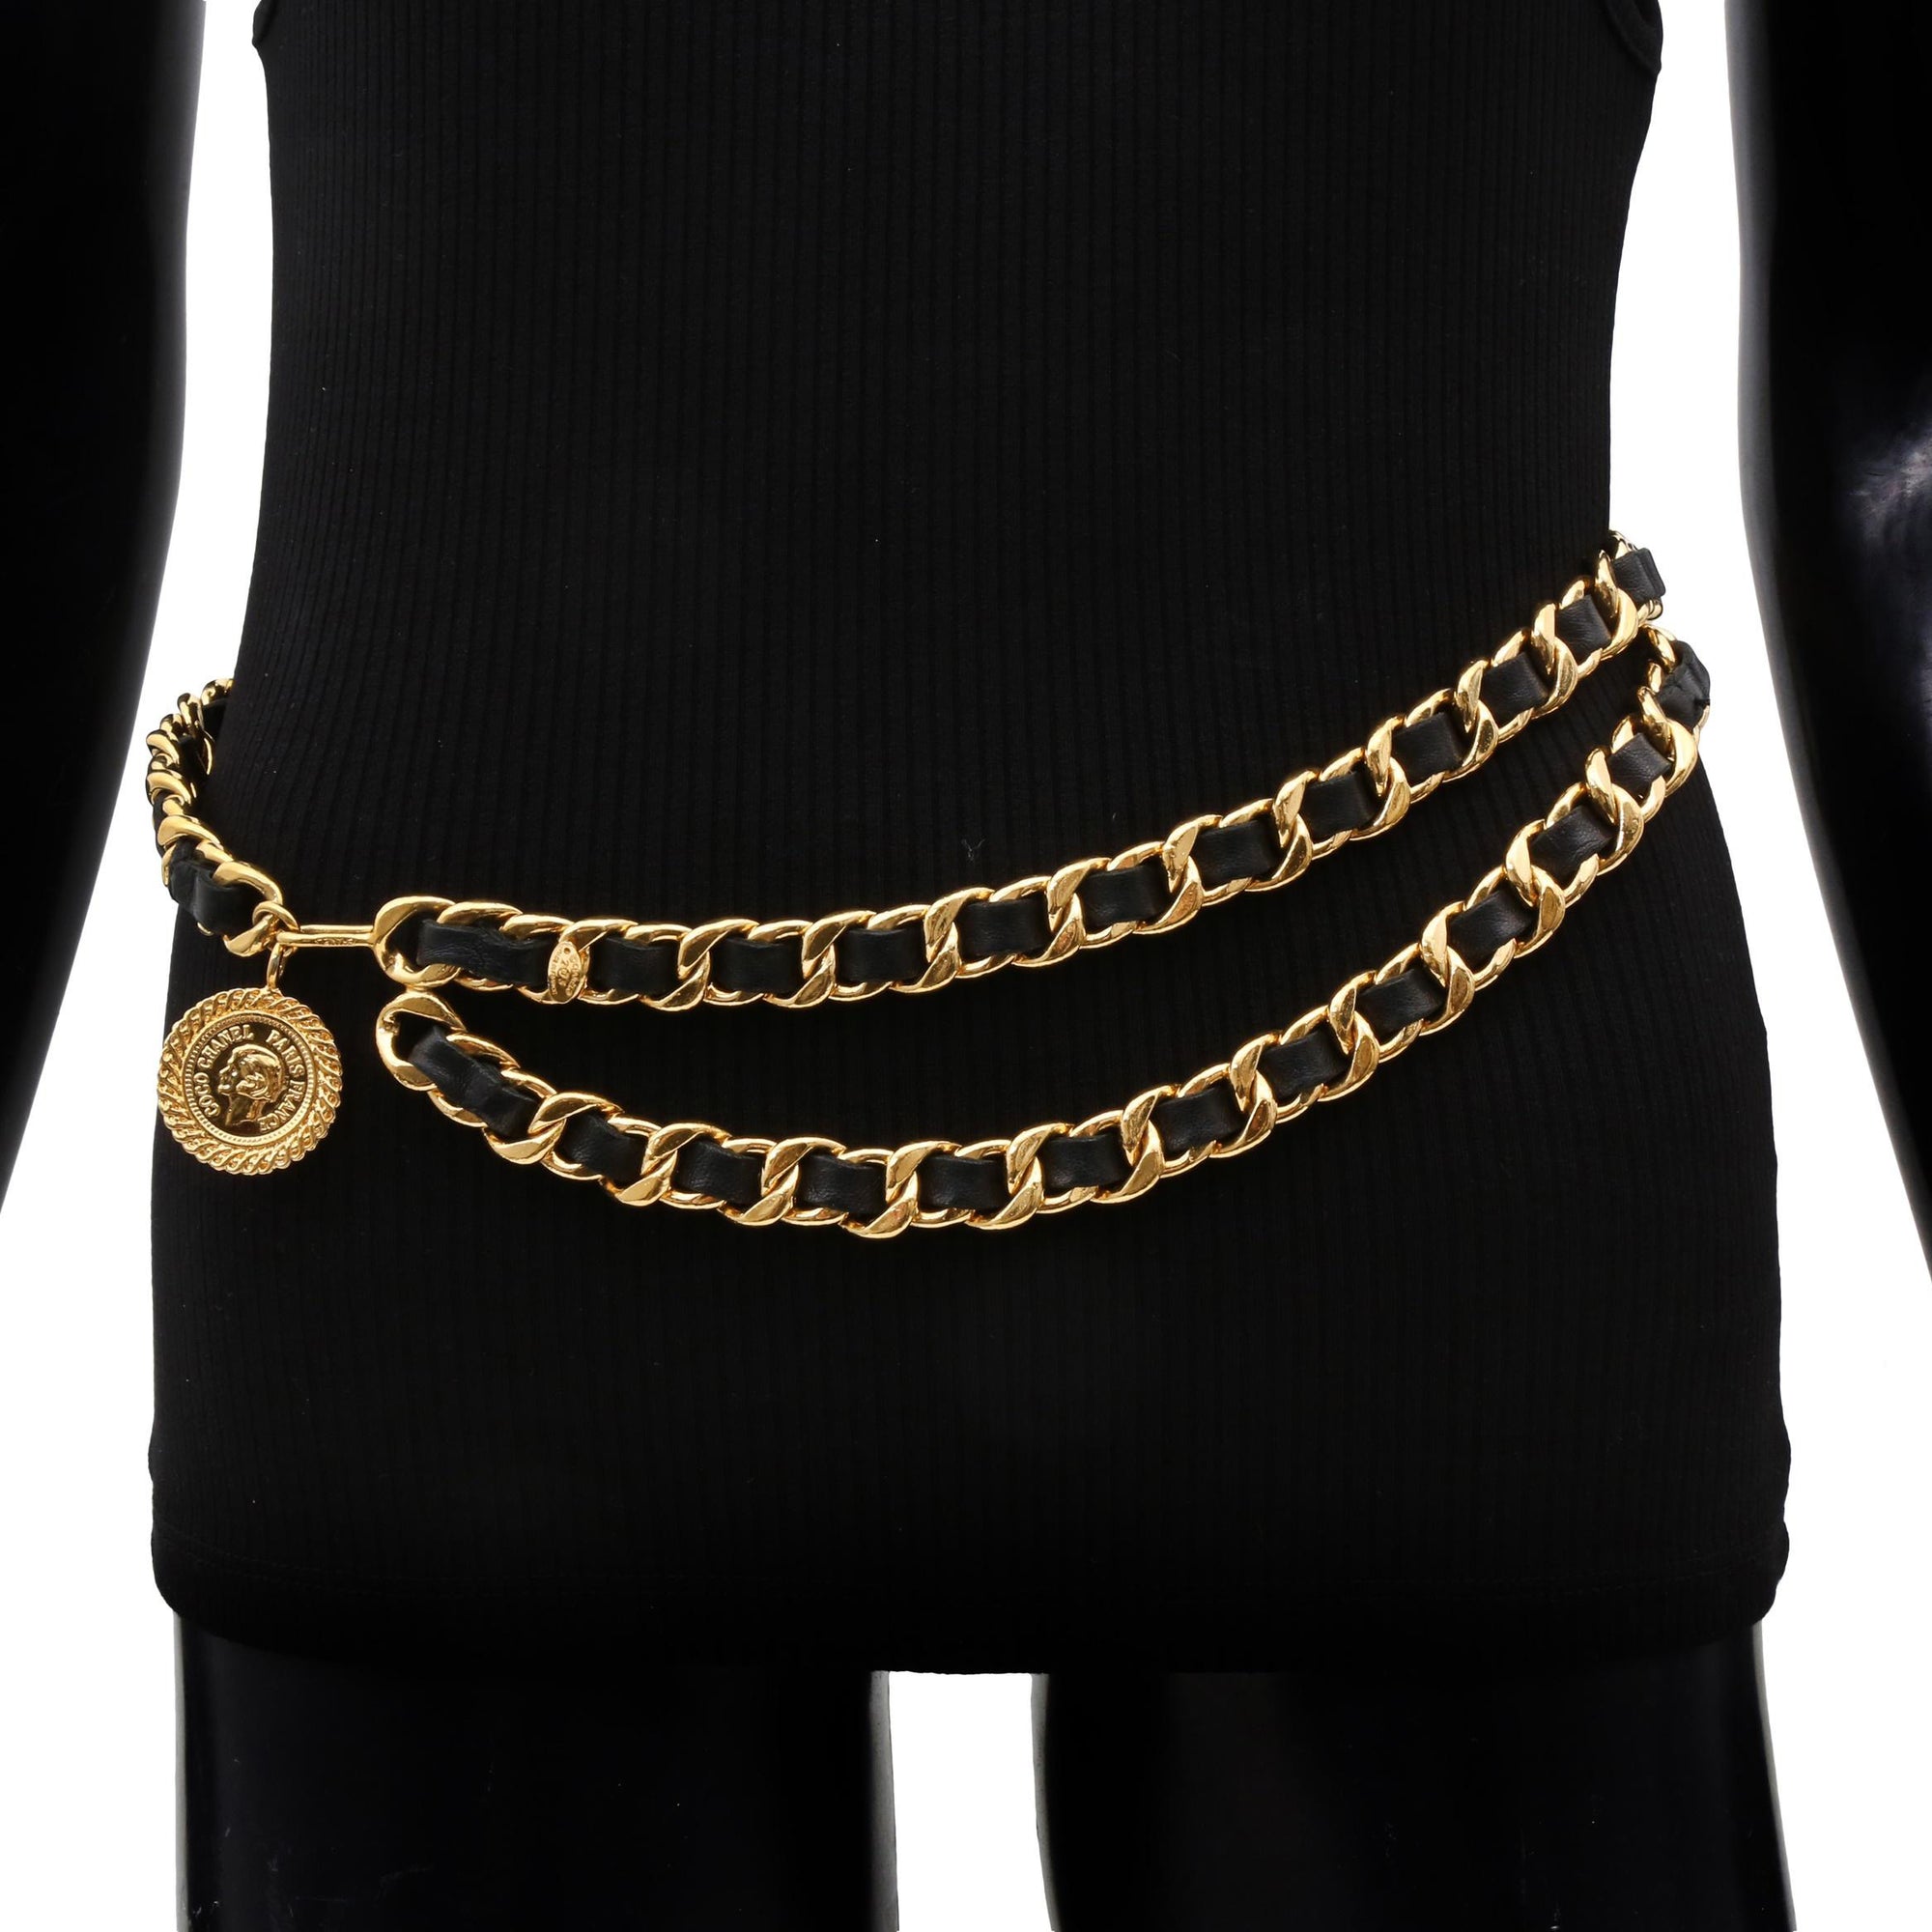 CHANEL Vintage Gold Tone Chain and Leather CC Logo Classic 